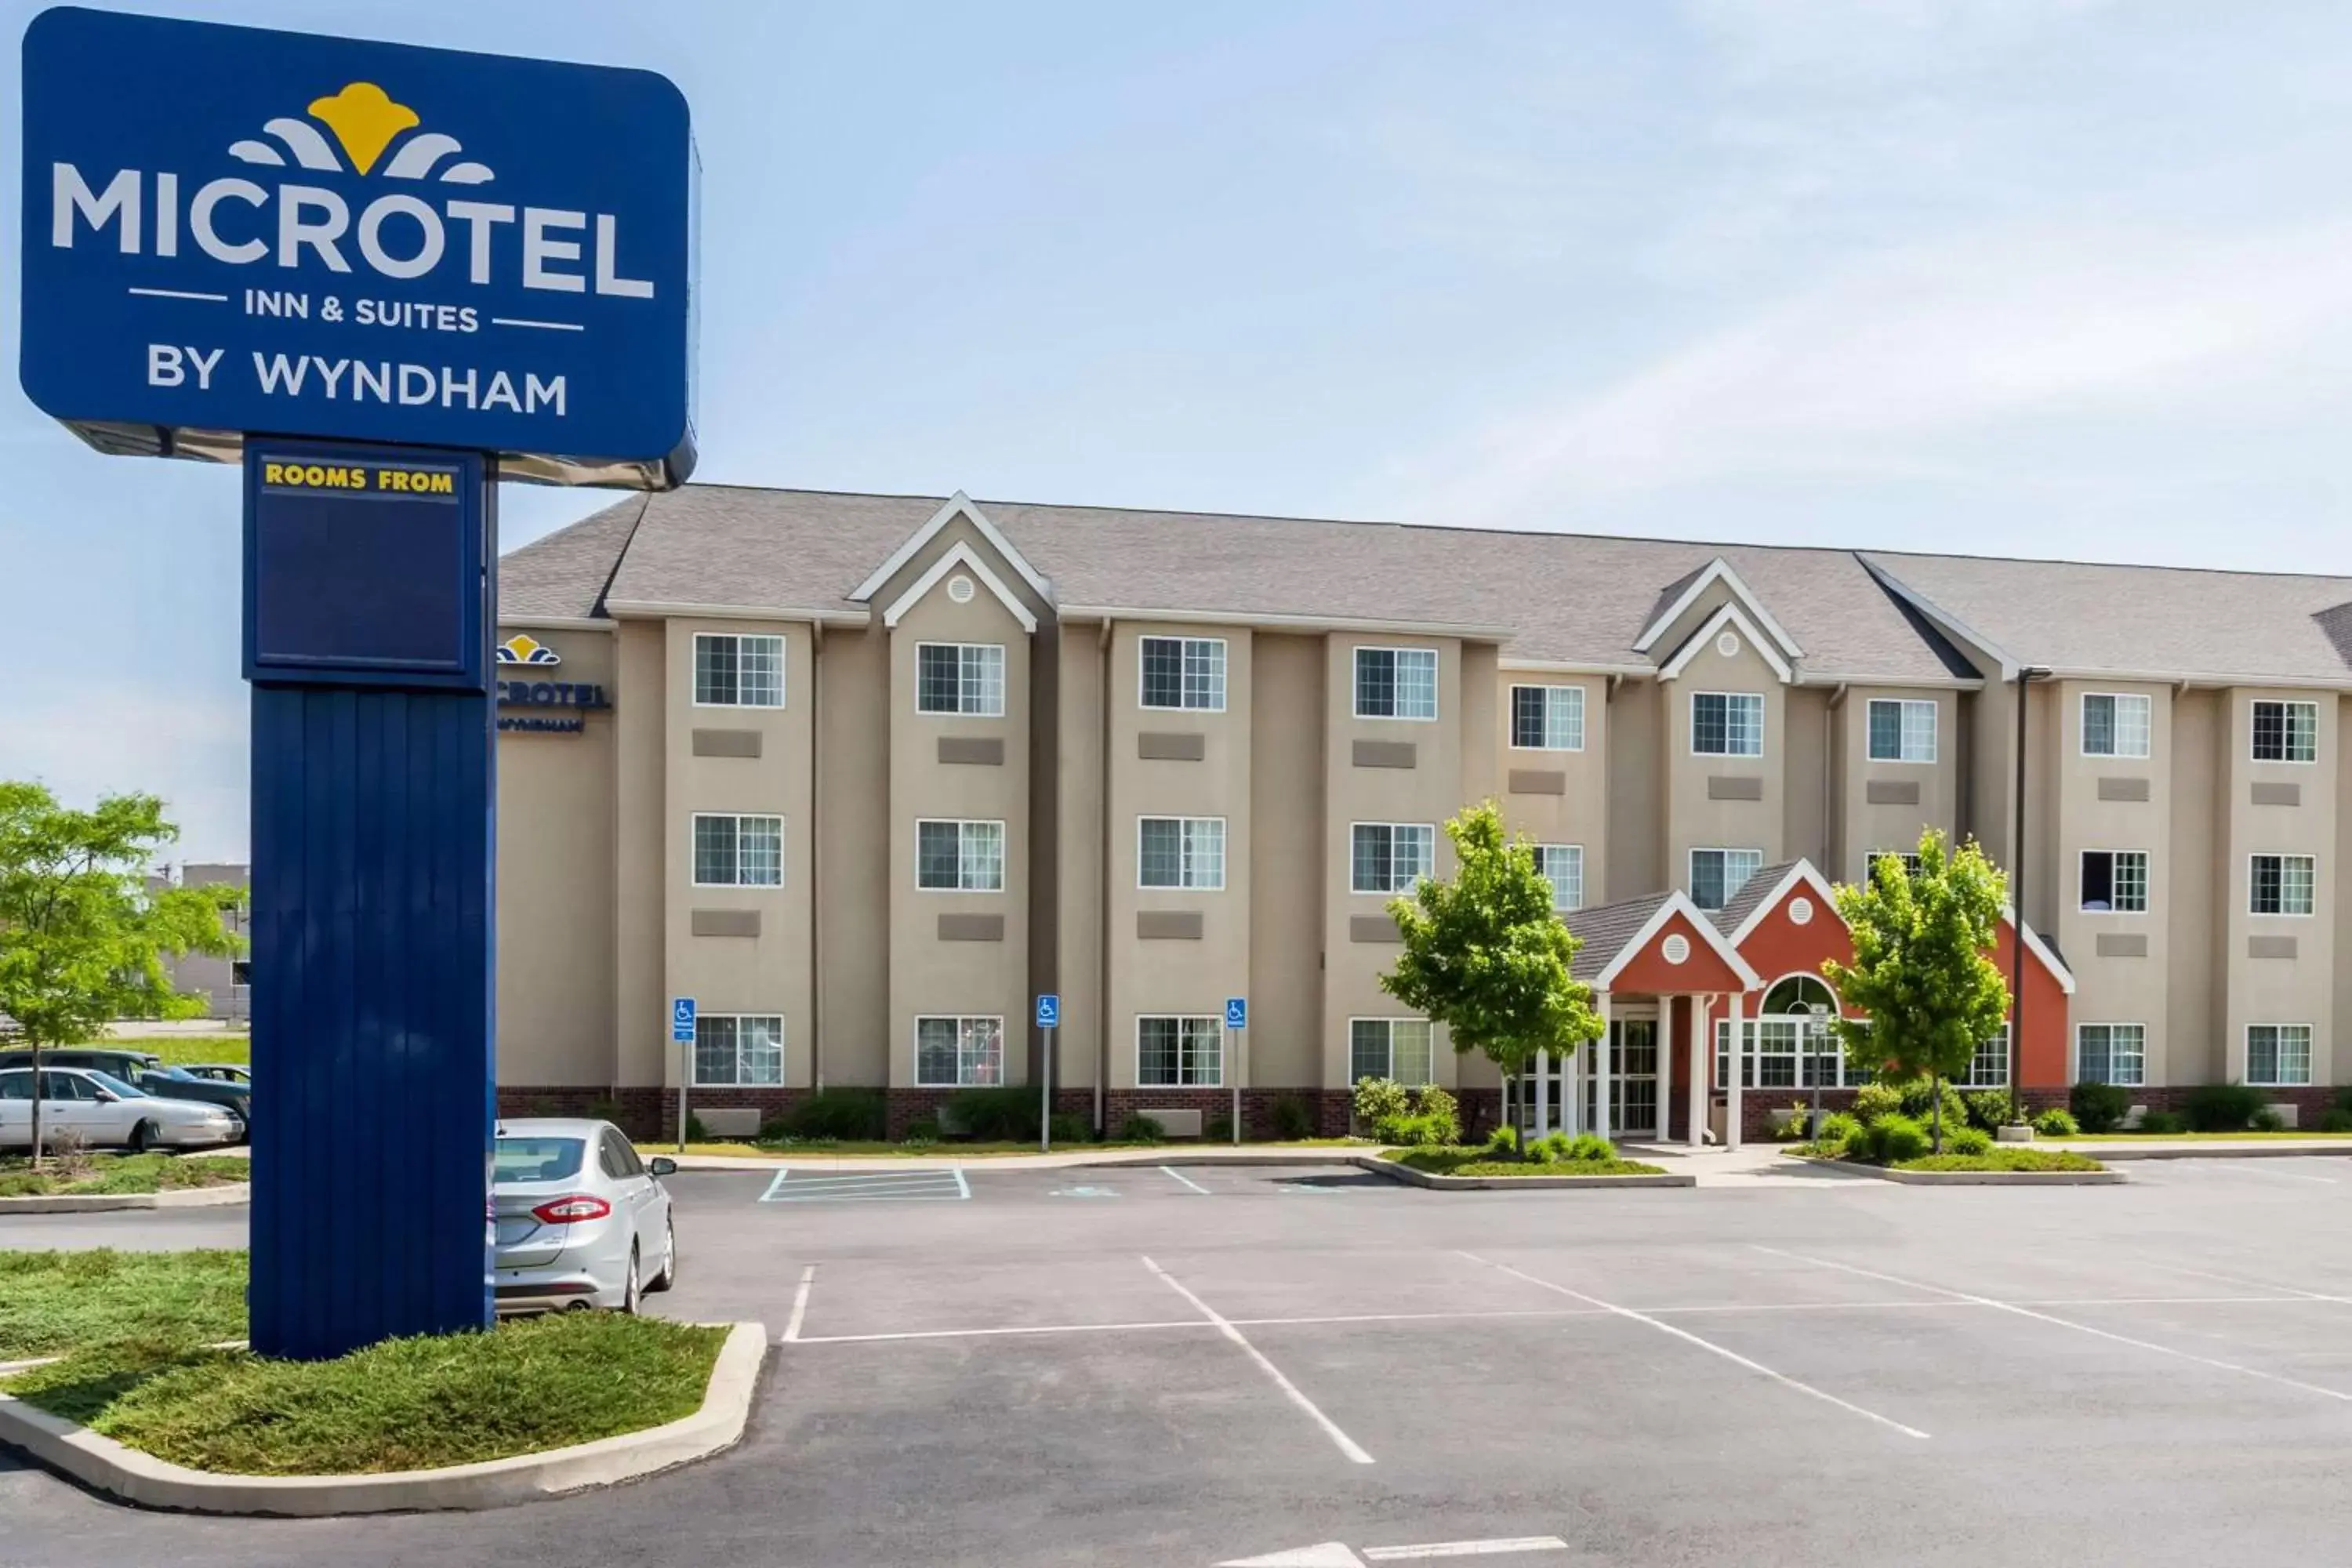 Property building in Microtel Inn & Suites